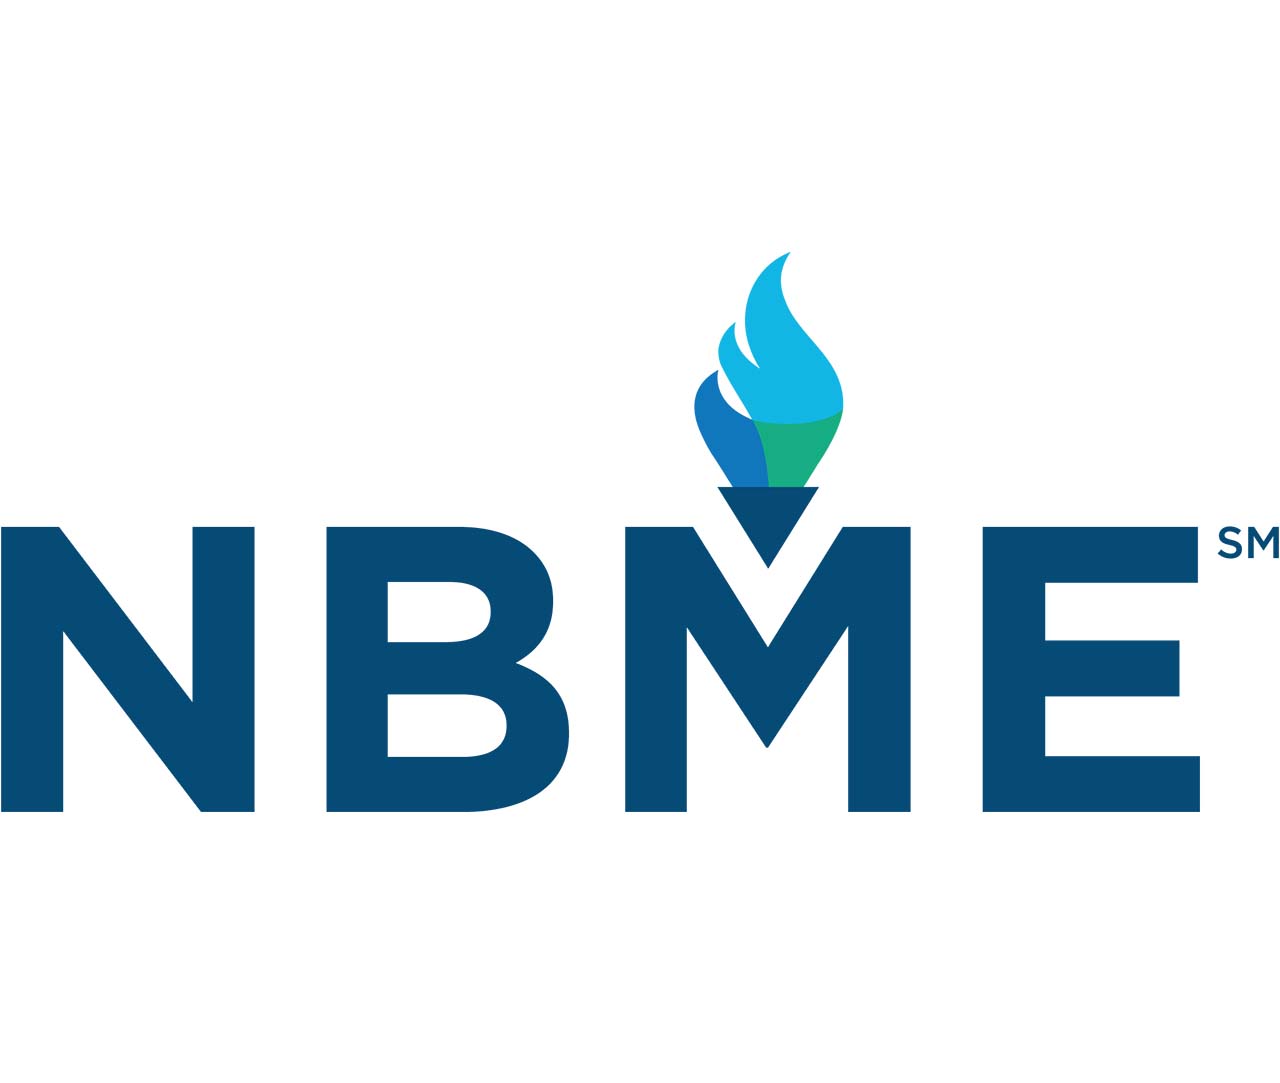 How to Interpret the New NBME Score Reports